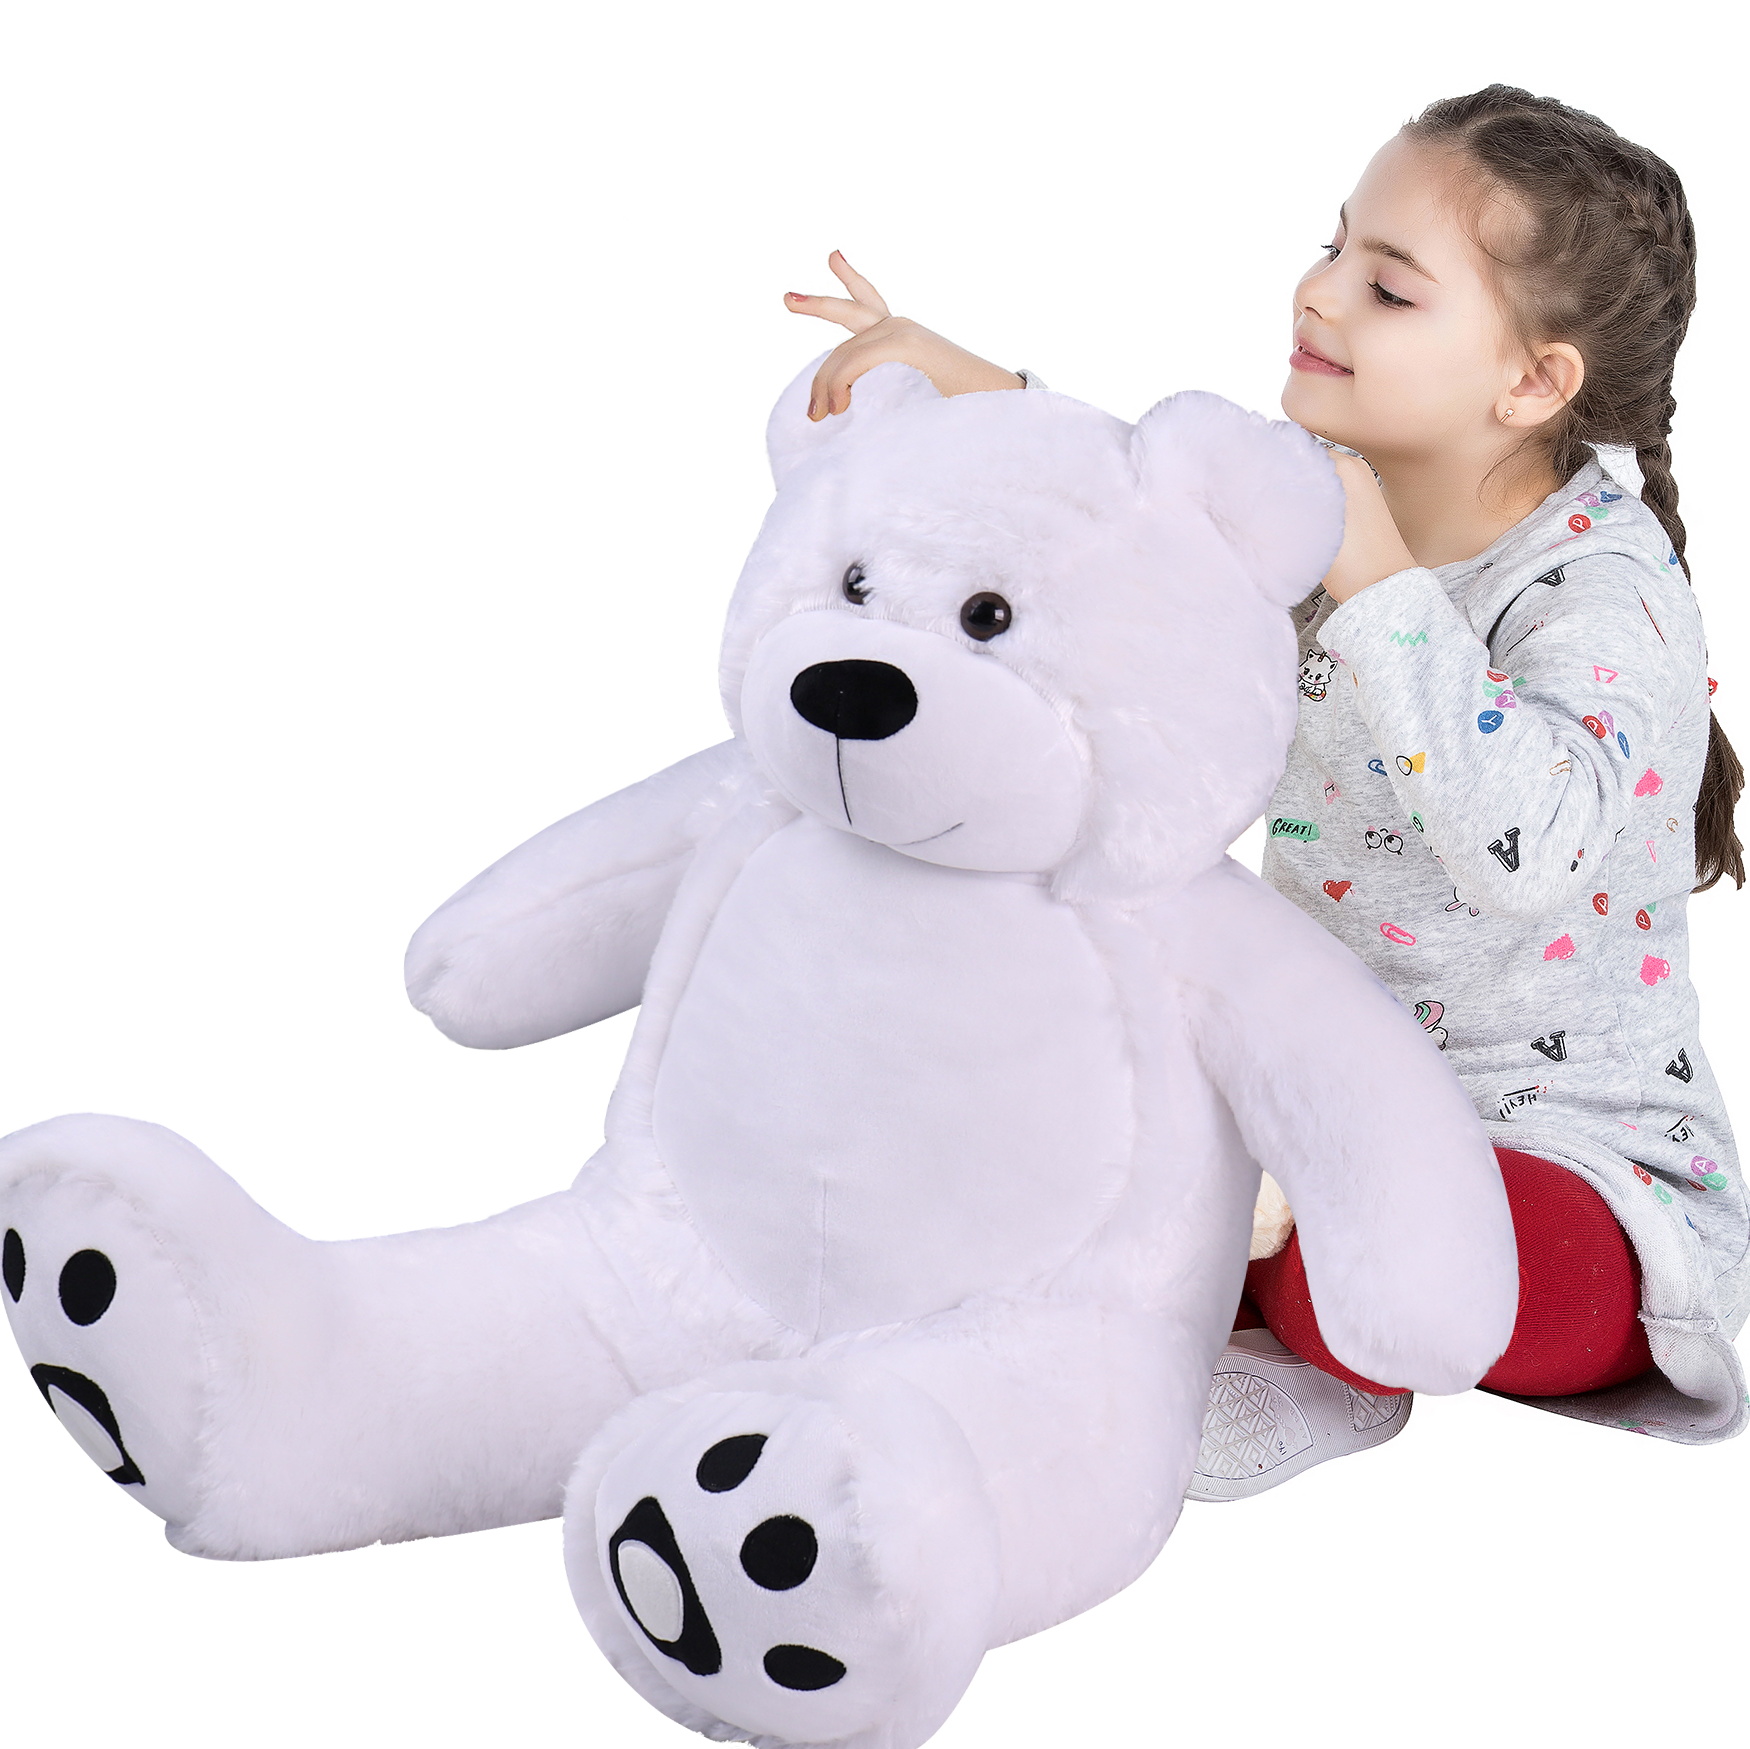 WOWMAX 3 Foot Giant Teddy Bear Daney Cuddly Stuffed Plush Animals Teddy Bear Toy Doll for Birthday Christmas White 36 Inches - image 3 of 5